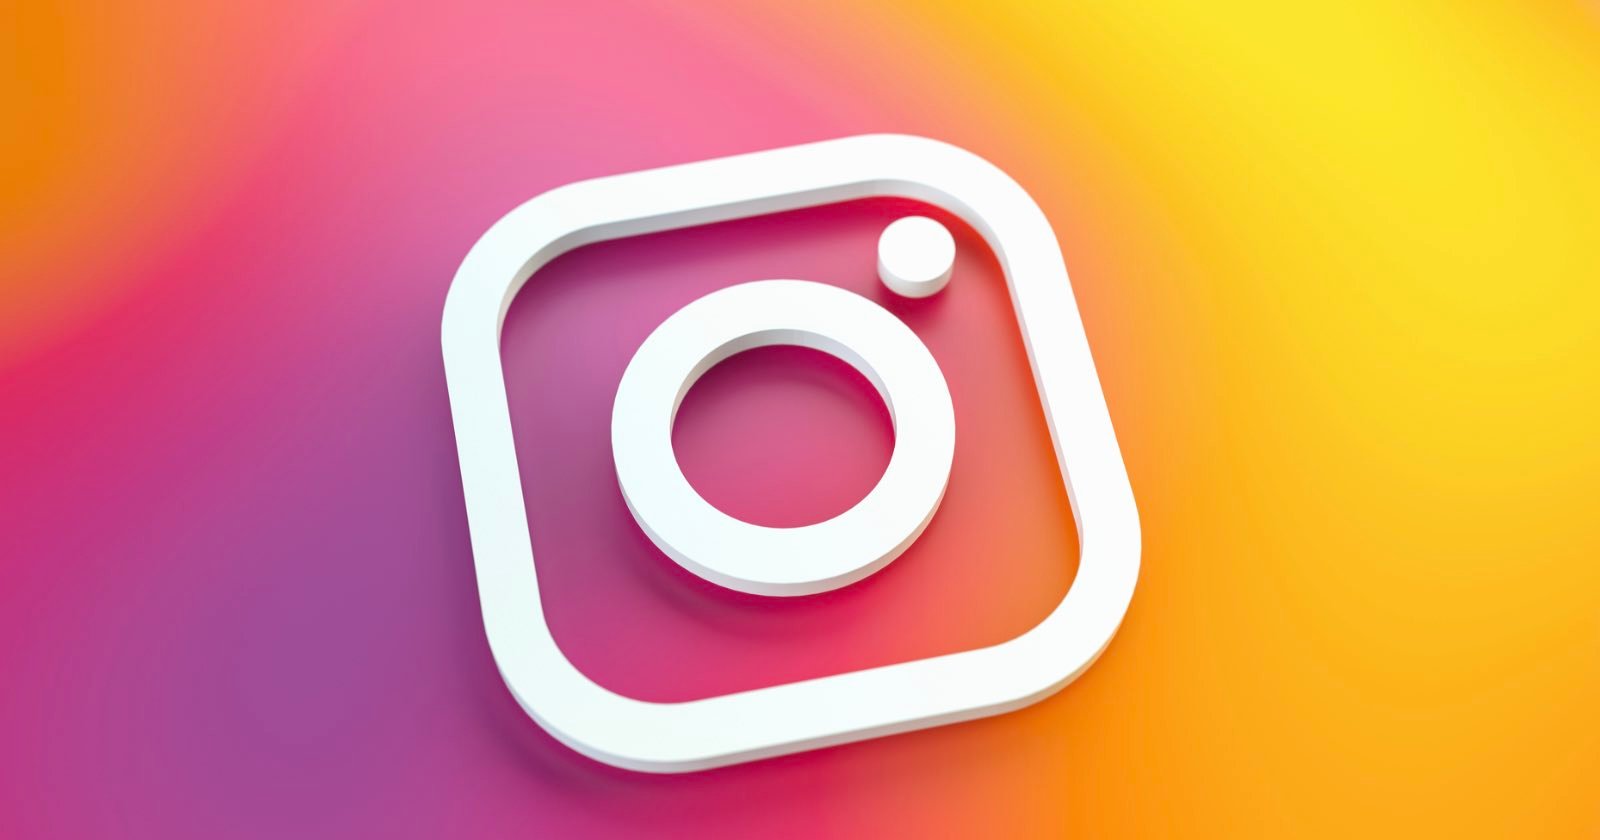  instagram will let add polls comments section 